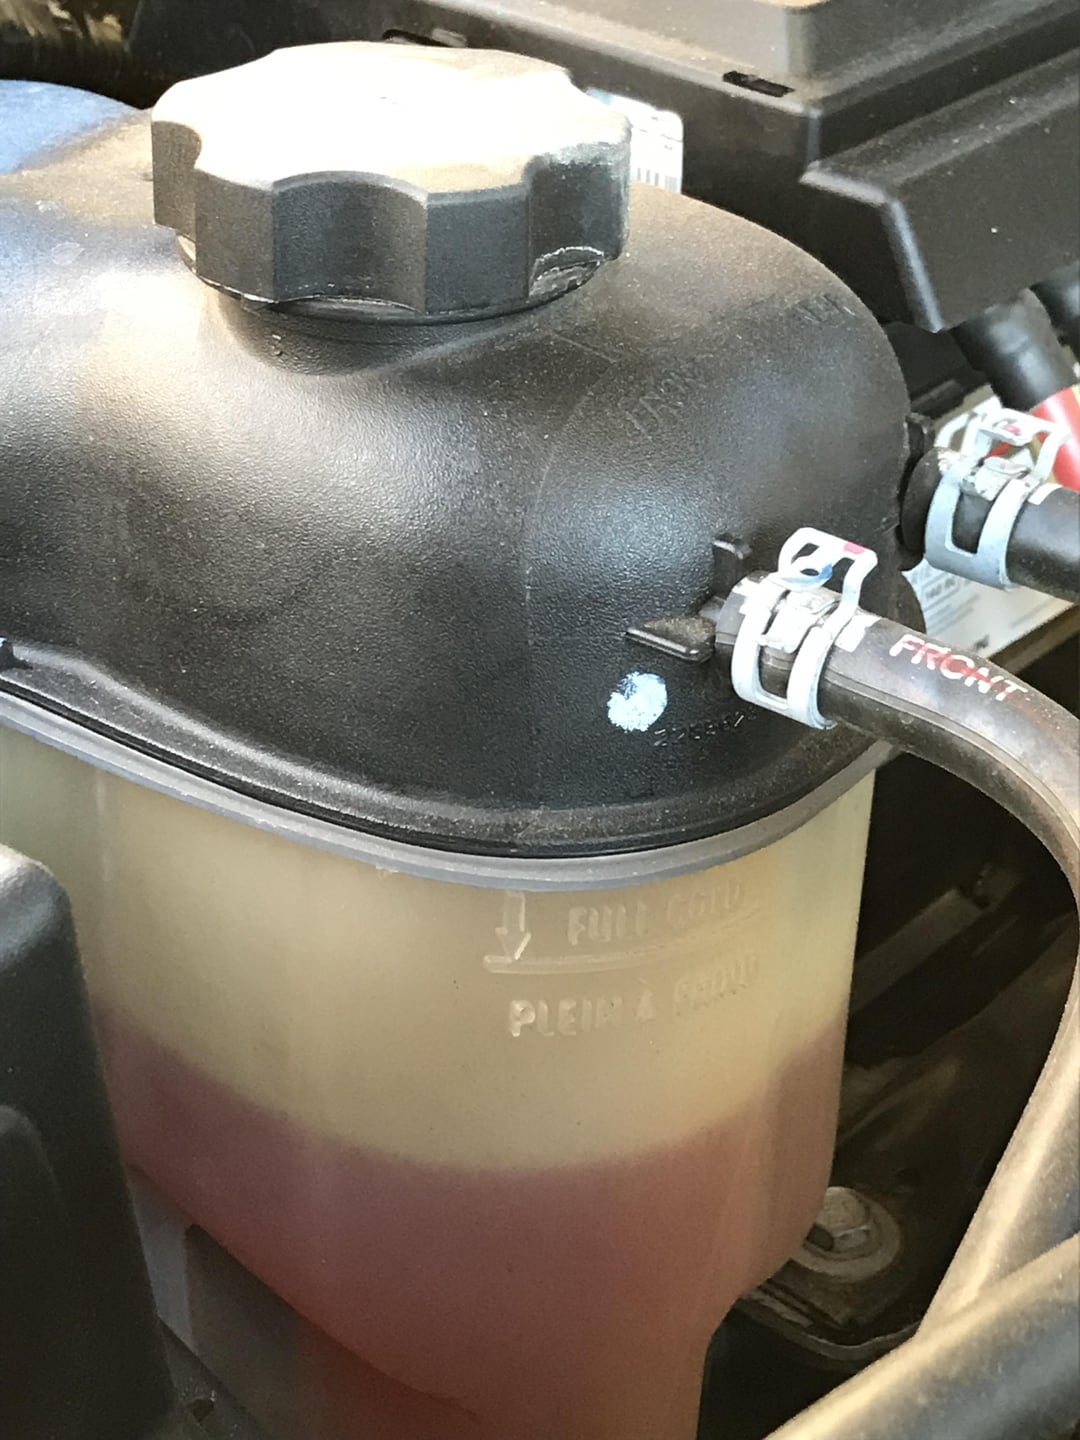 best coolant for chevy silverado 1500